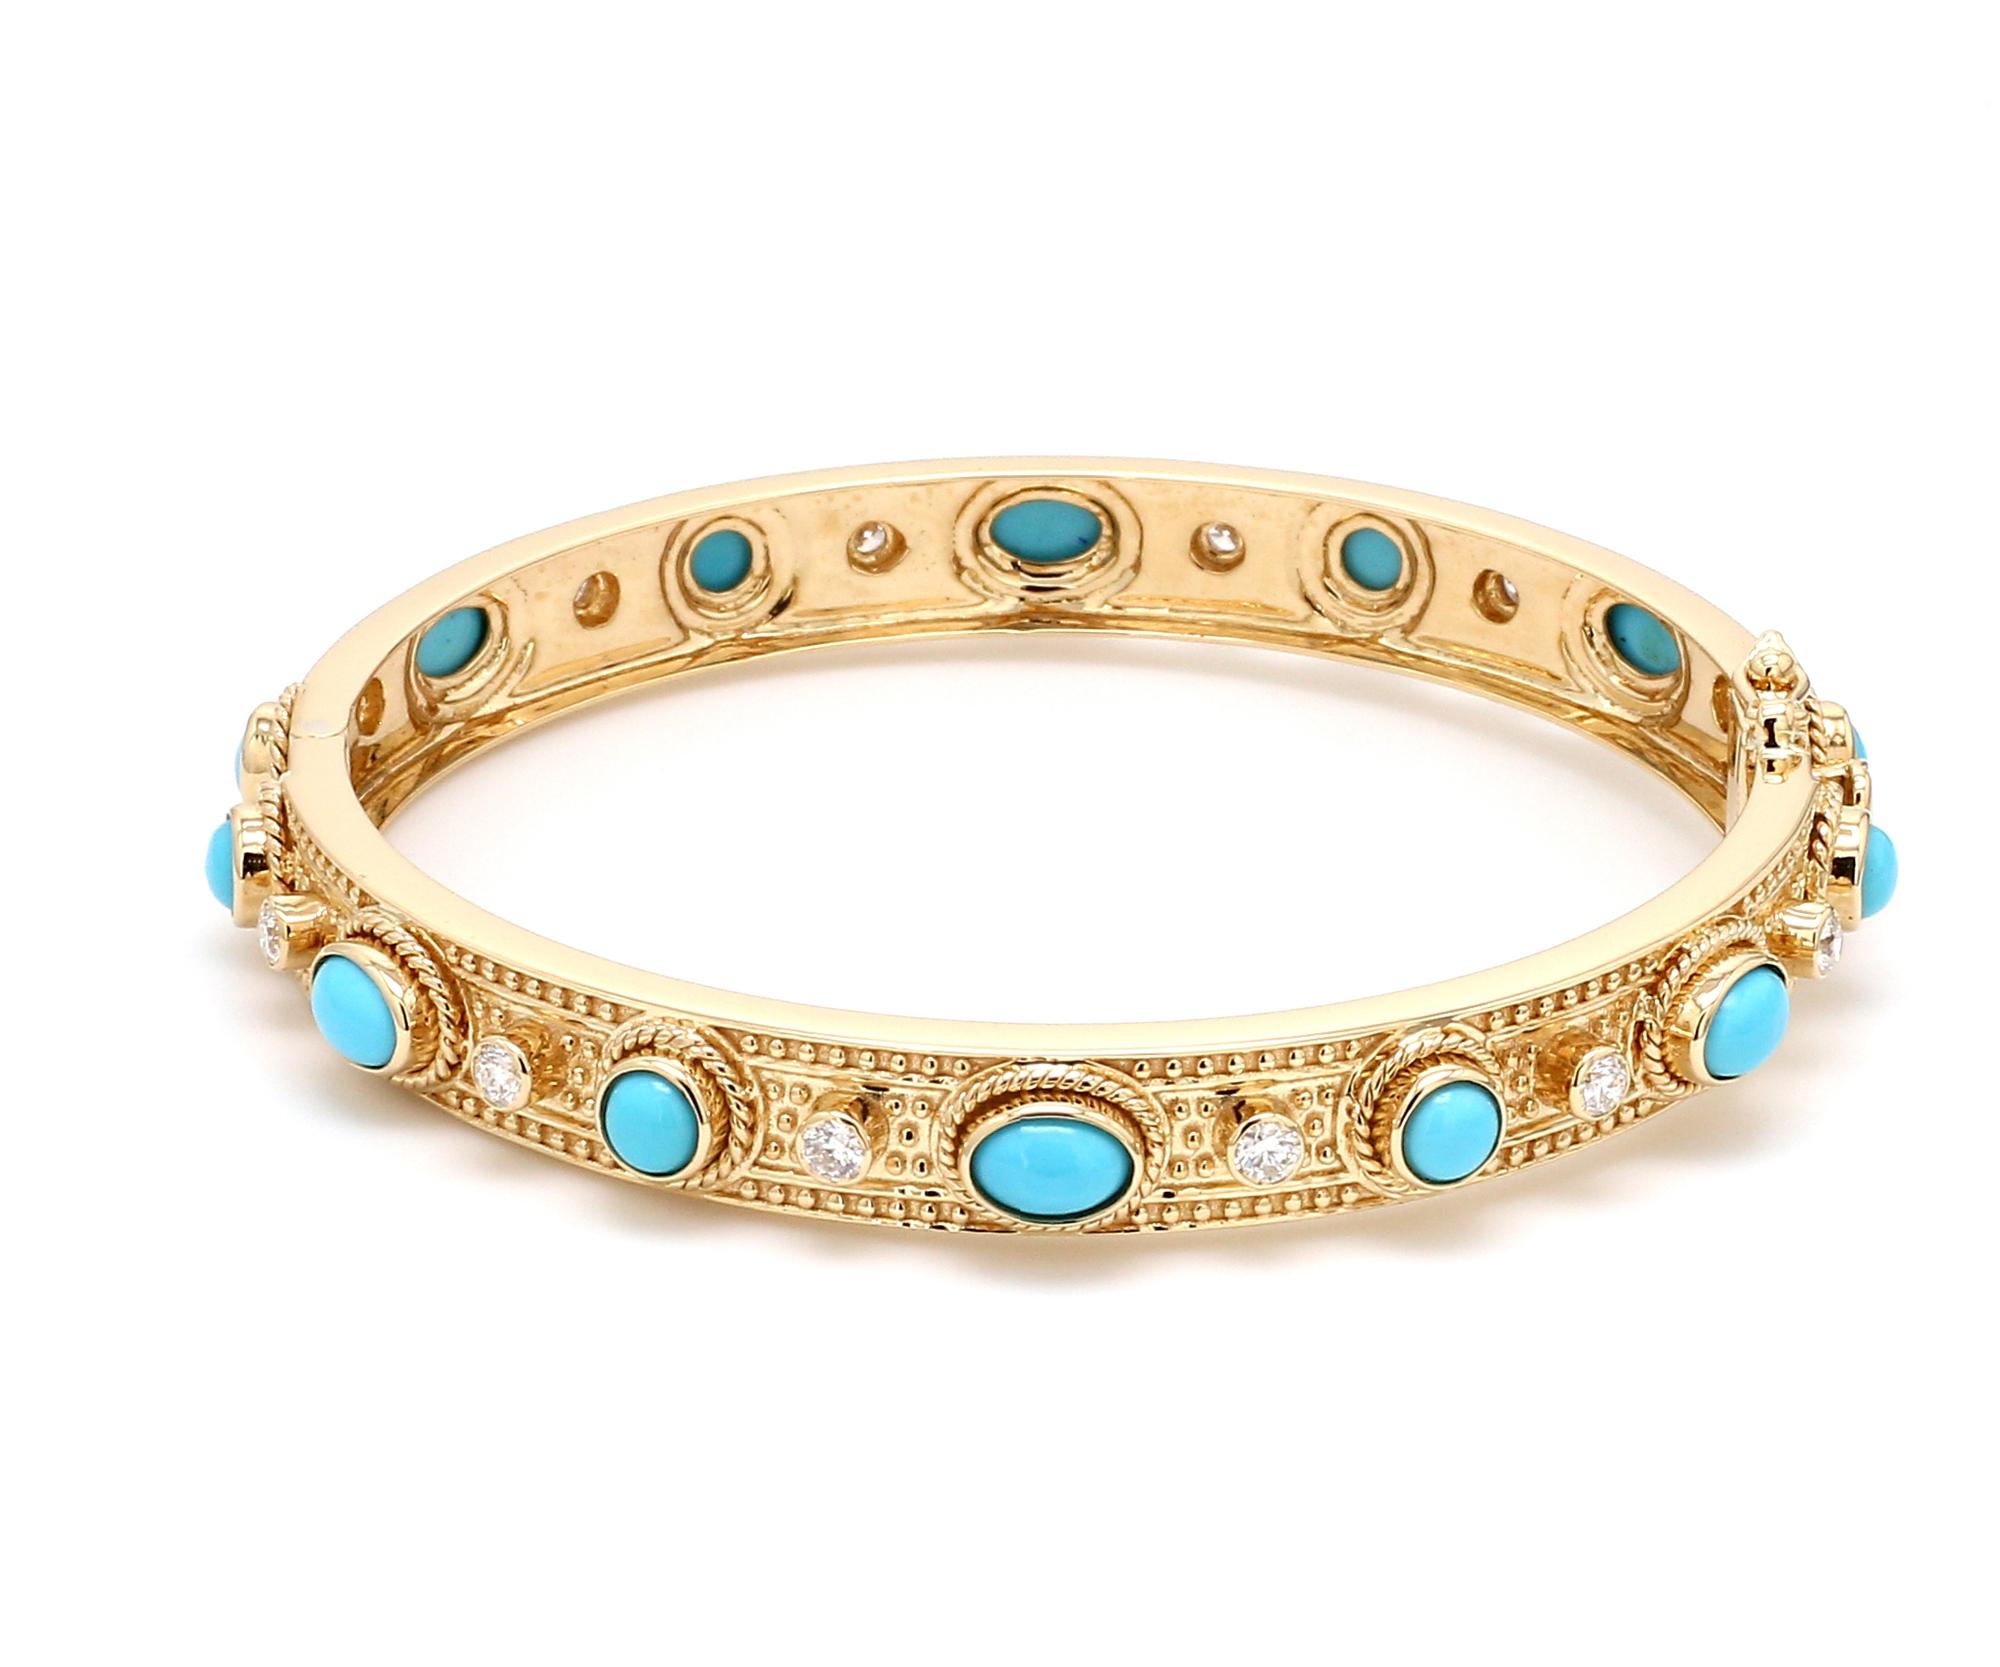 Item Code :- CN-25657 (14k)
Gross Wt :- 19.92 gm
14k Yellow Gold Wt :- 18.82 gm
Diamond Wt :- 0.75 ct  ( AVERAGE DIAMOND CLARITY SI1-SI2 & COLOR H-I )
Turquoise Wt :- 4.75 ct
Bangle Size :- 62.93 x 64.22 x 8 mm
✦ Sizing
.....................
We can